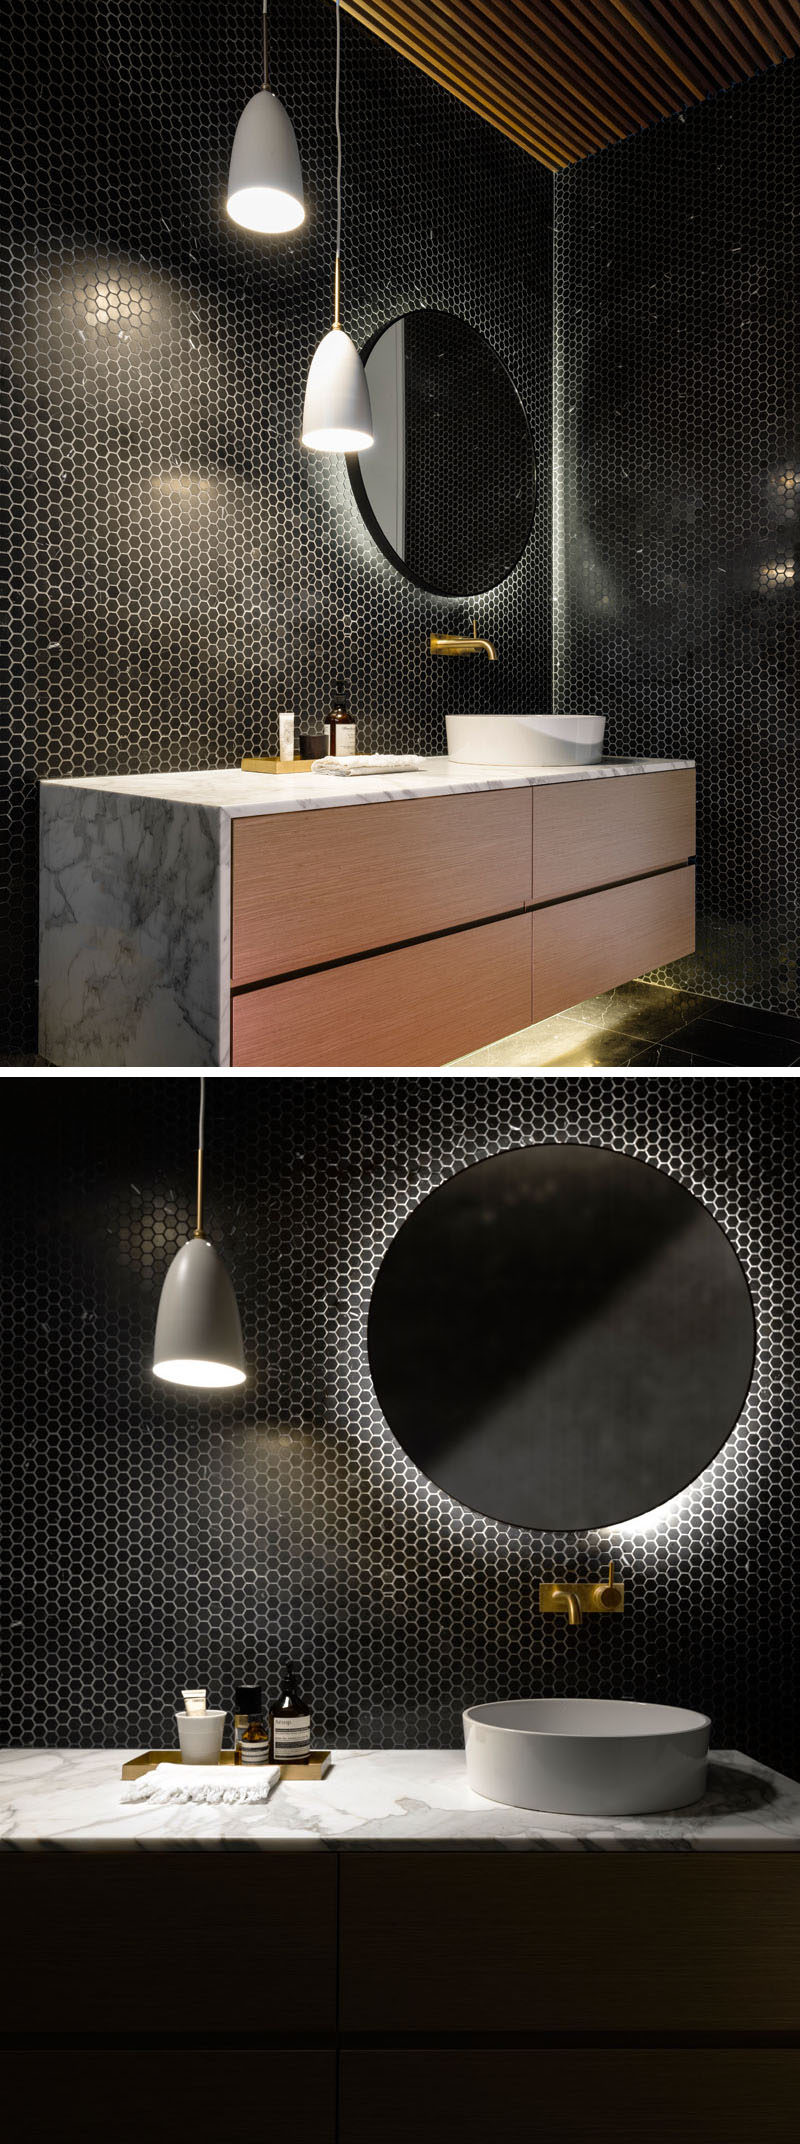 This bathroom has its walls covered in tiny black hexagonal tiles, and the vanity and mirror both feature hidden lighting.